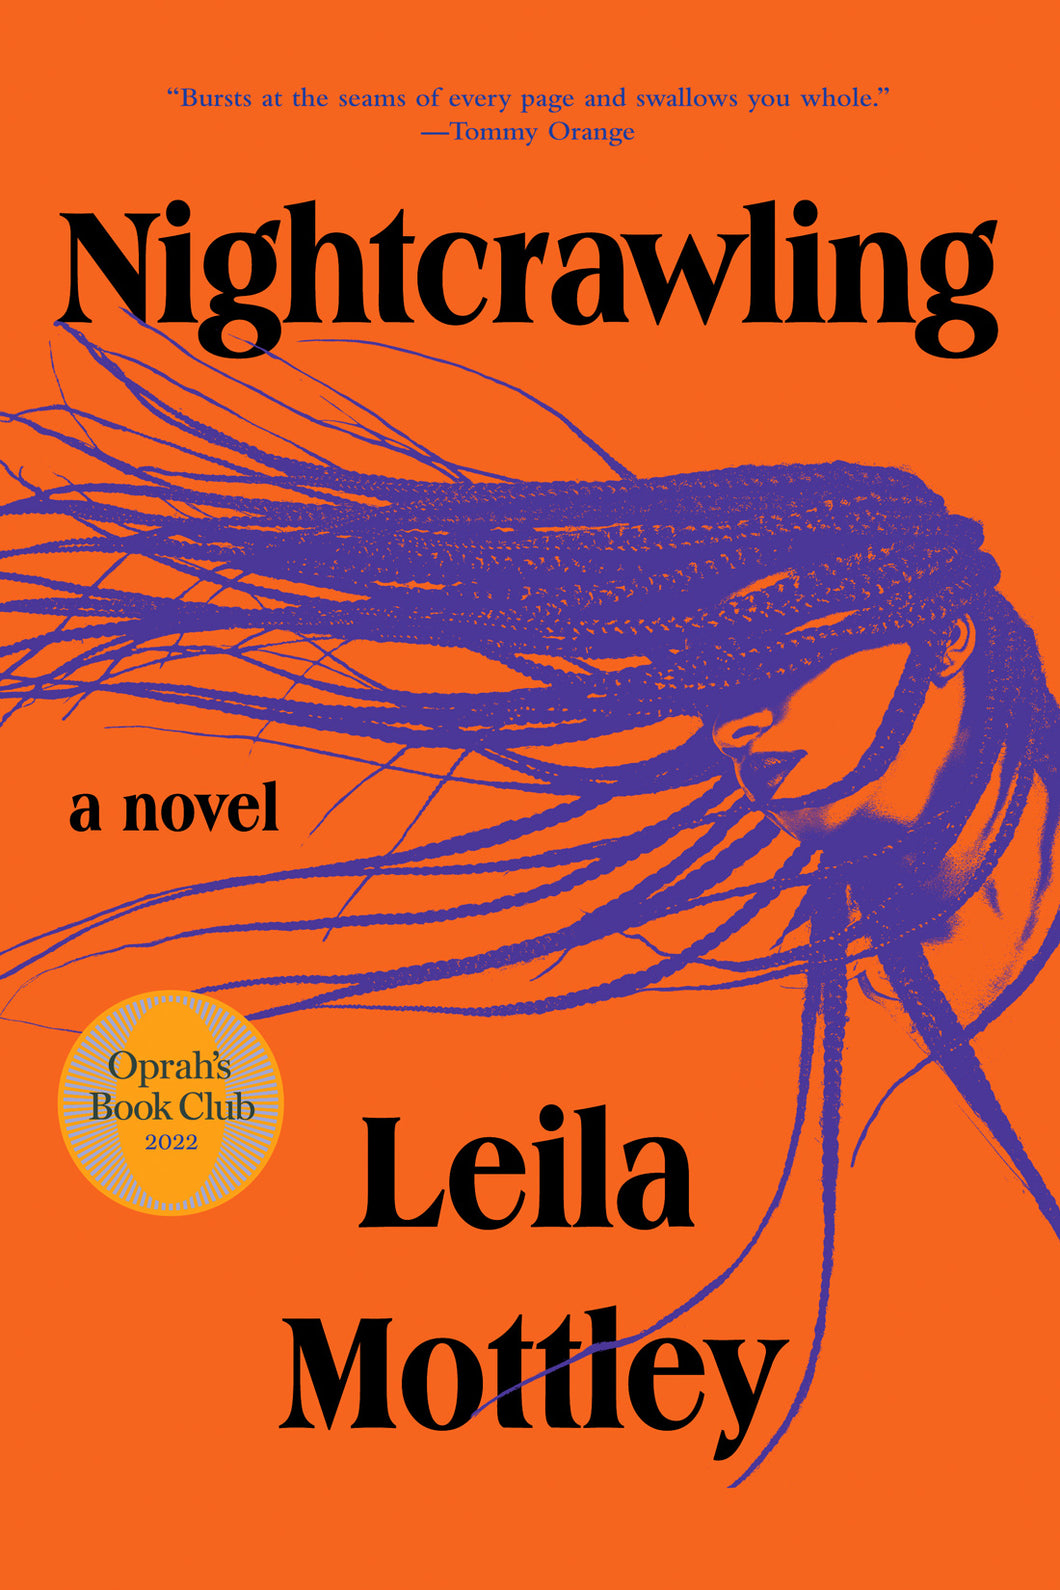 Nightcrawling by Leila Mottley / Hardcover - NEW BOOK OR BOOK BOX